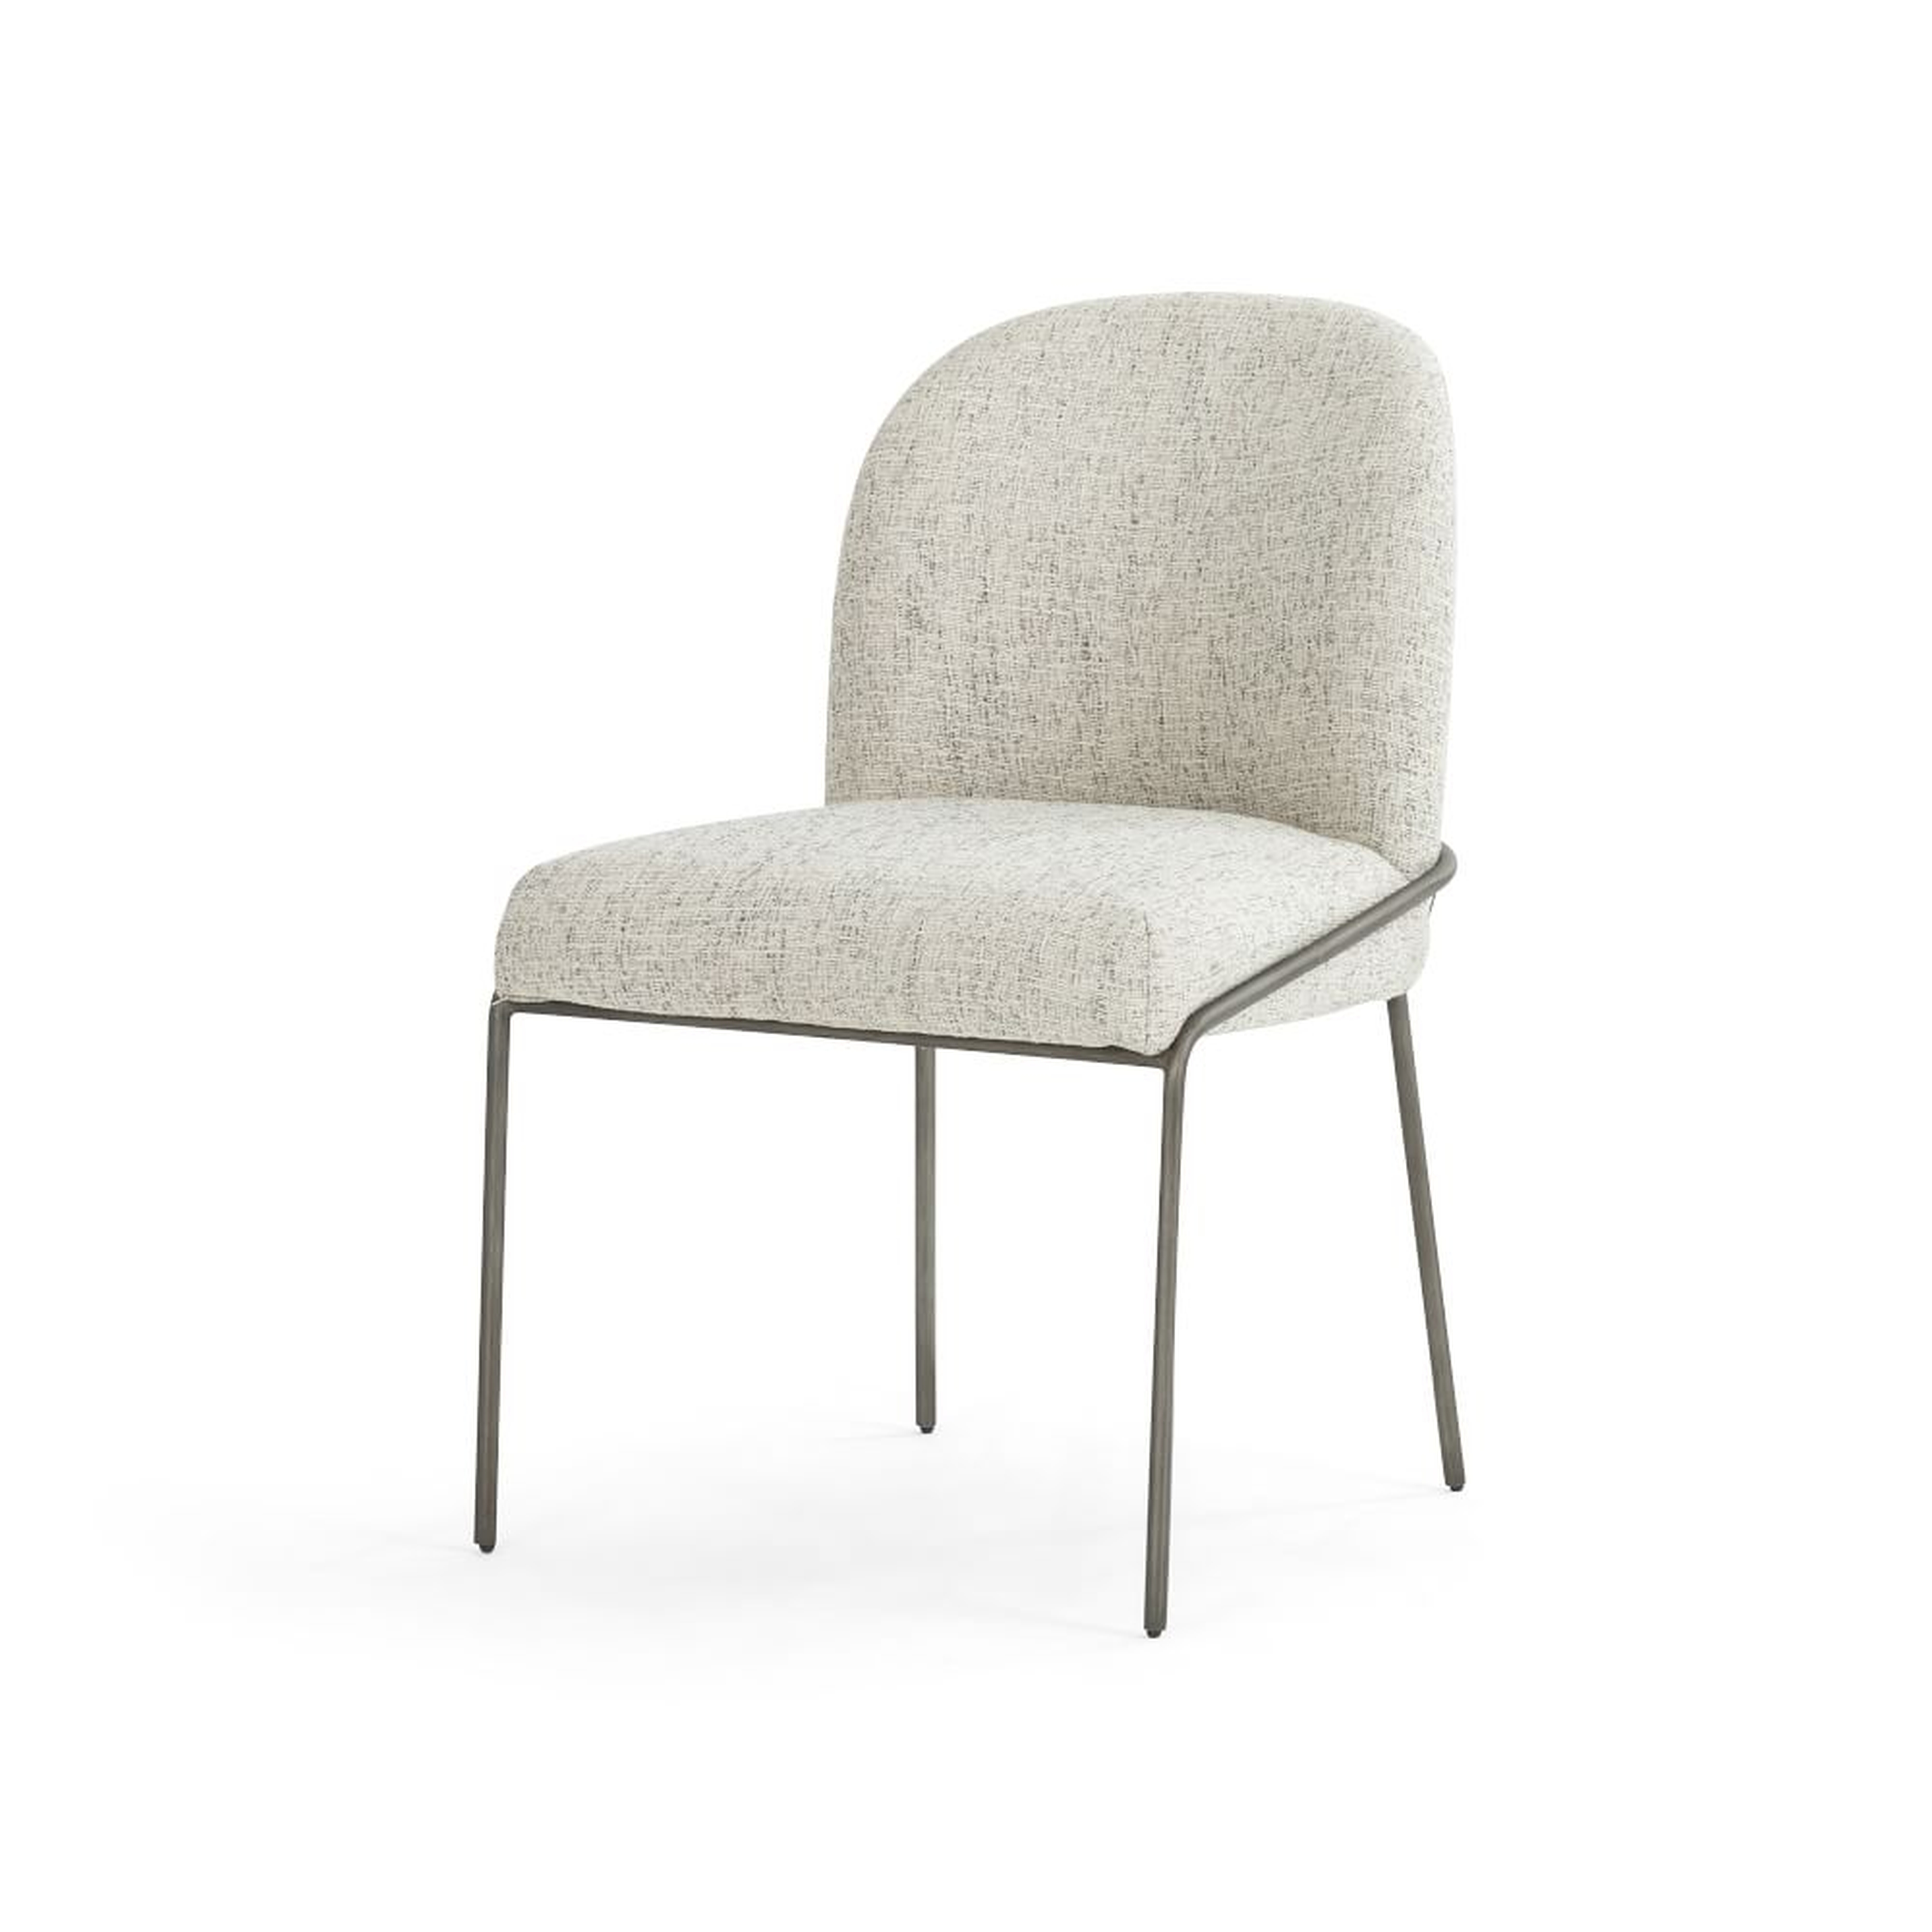 Astrud Dining Chair-Lyon Pewter S/2 - West Elm